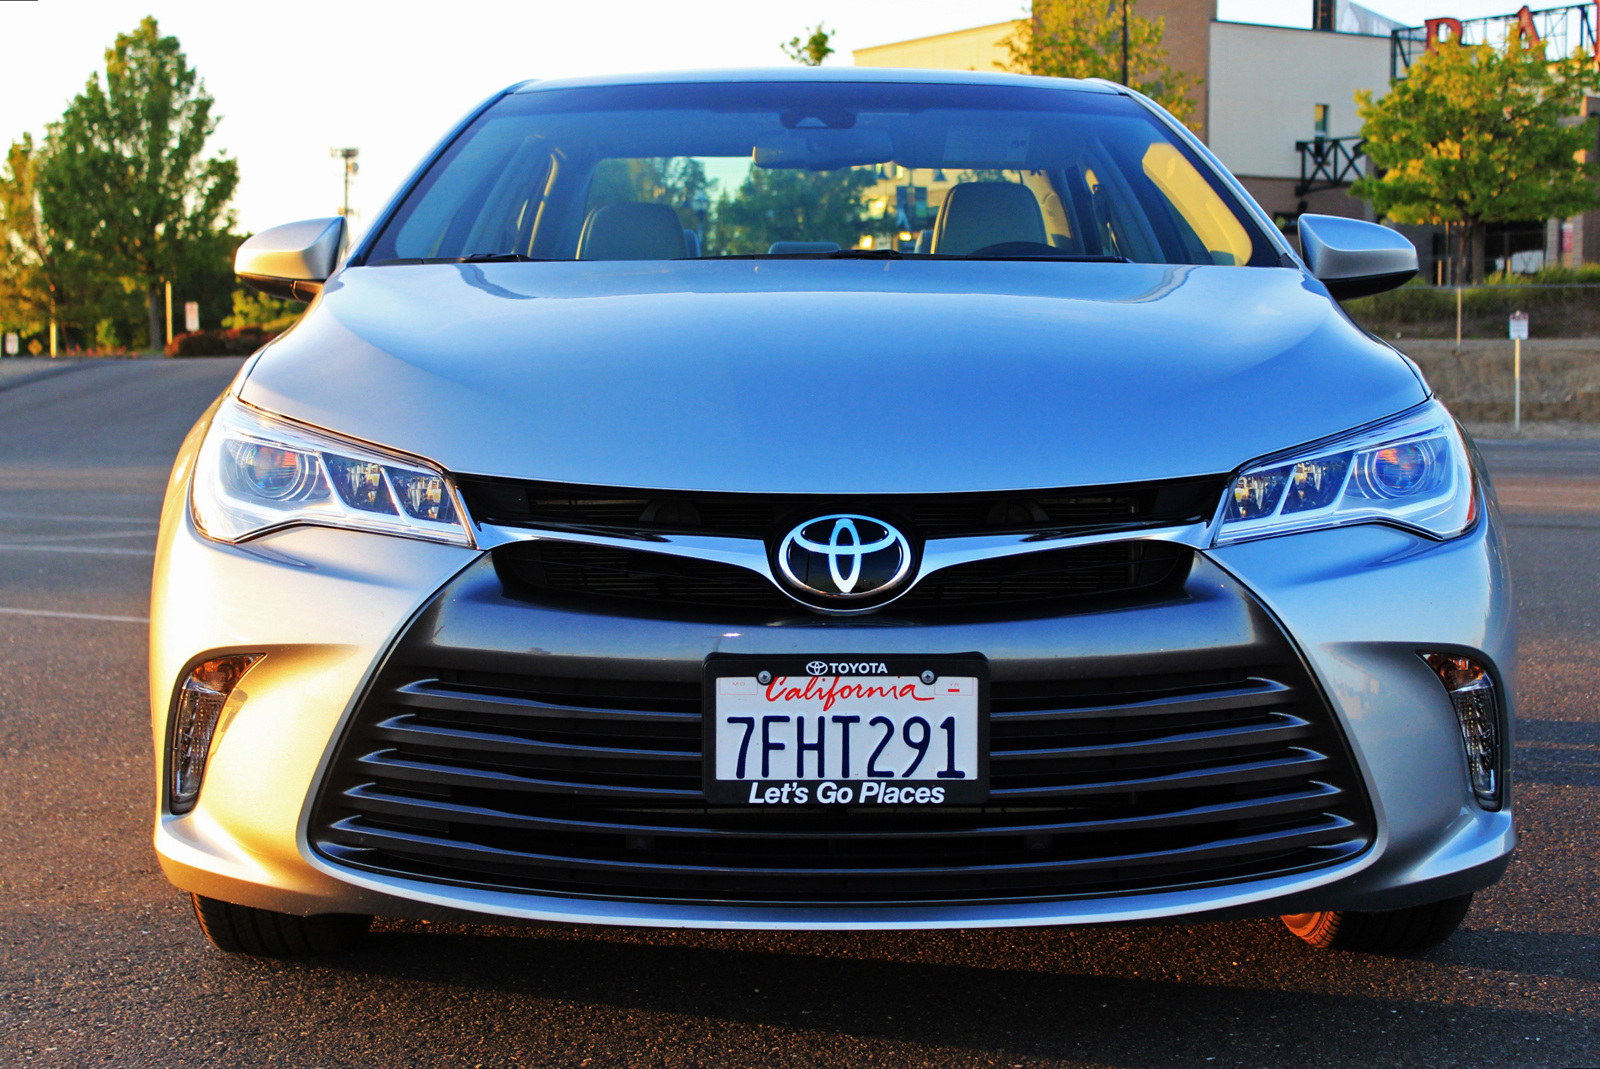 Imitation is the sincerest form of flattery, and the 2015 Camry XLE takes t...